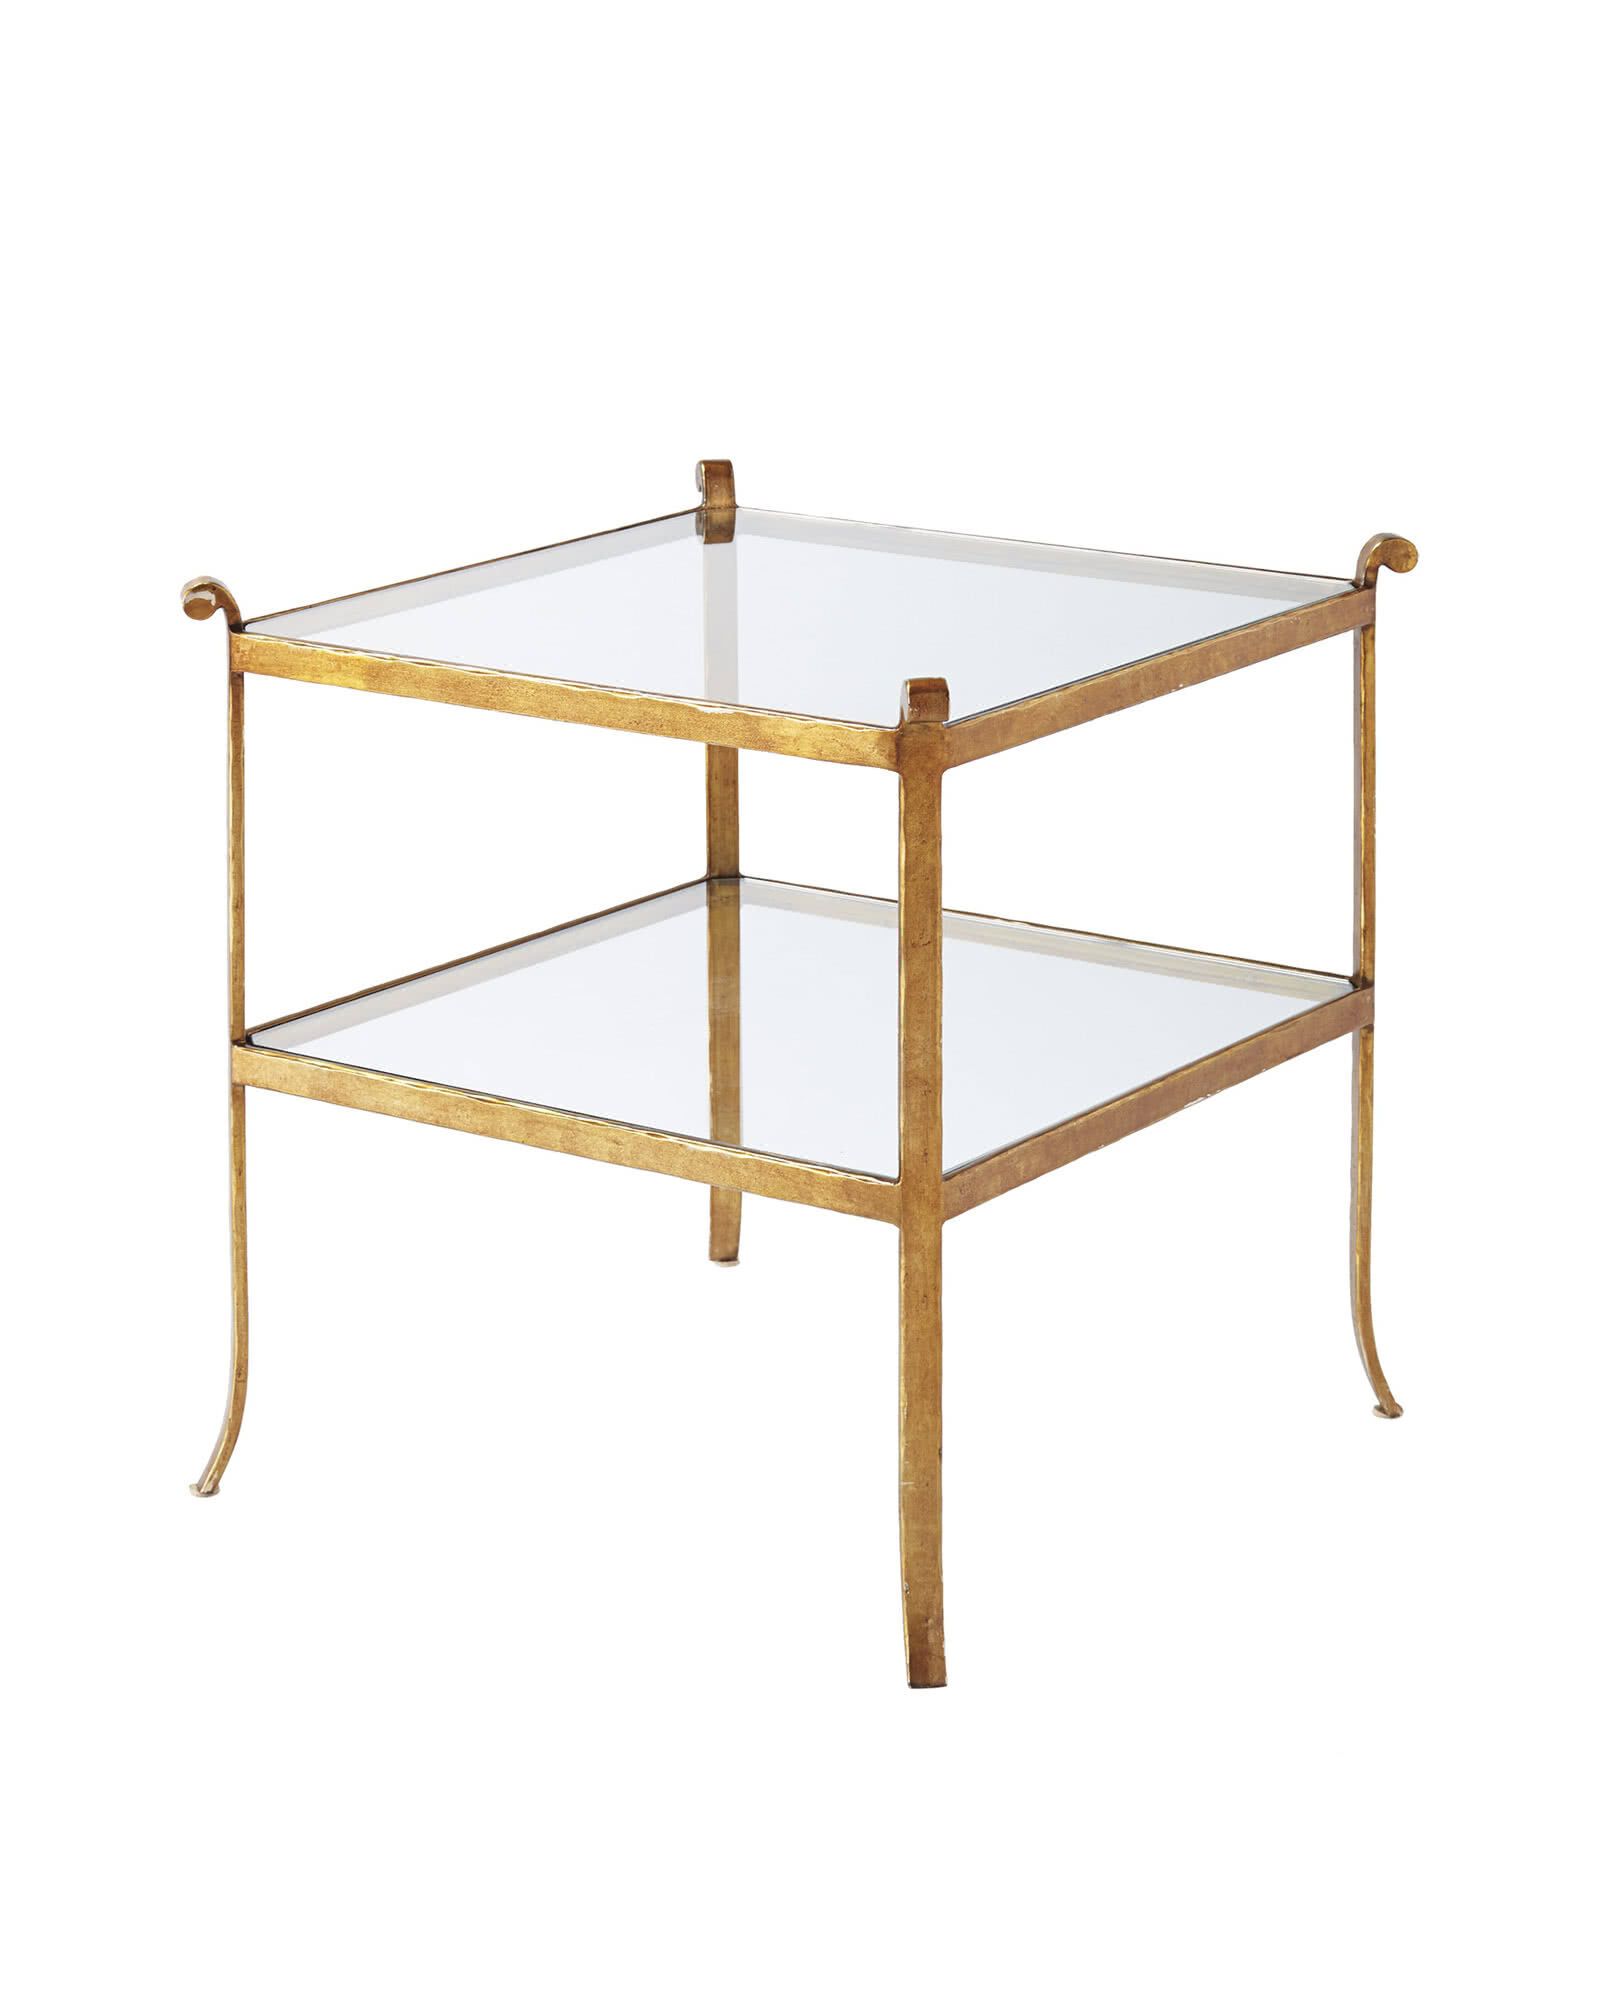 St. Germain Glass Side Table | Serena and Lily